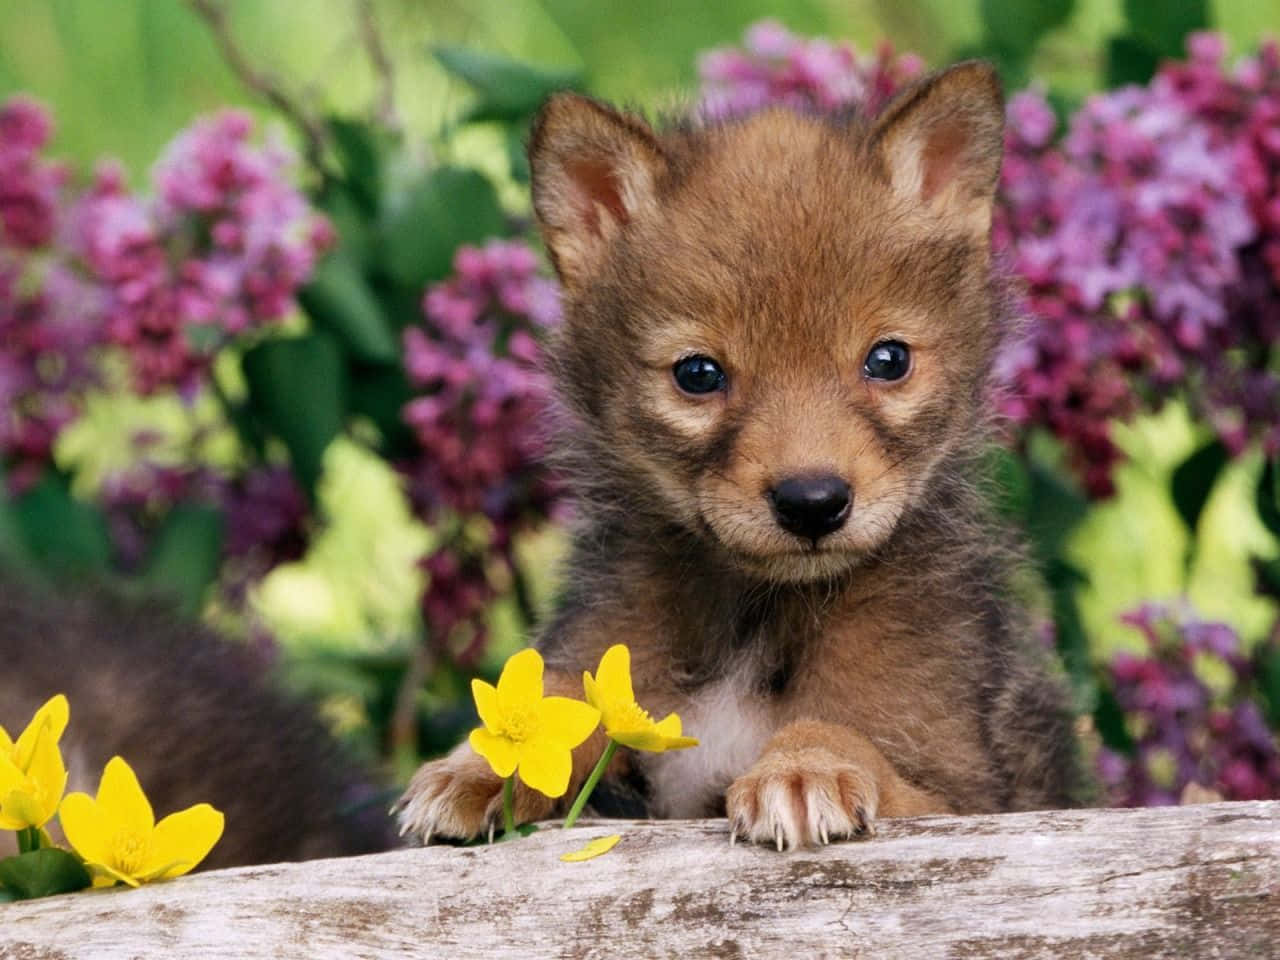 A Small Wolf Puppy Is Sitting On A Log With Yellow Flowers